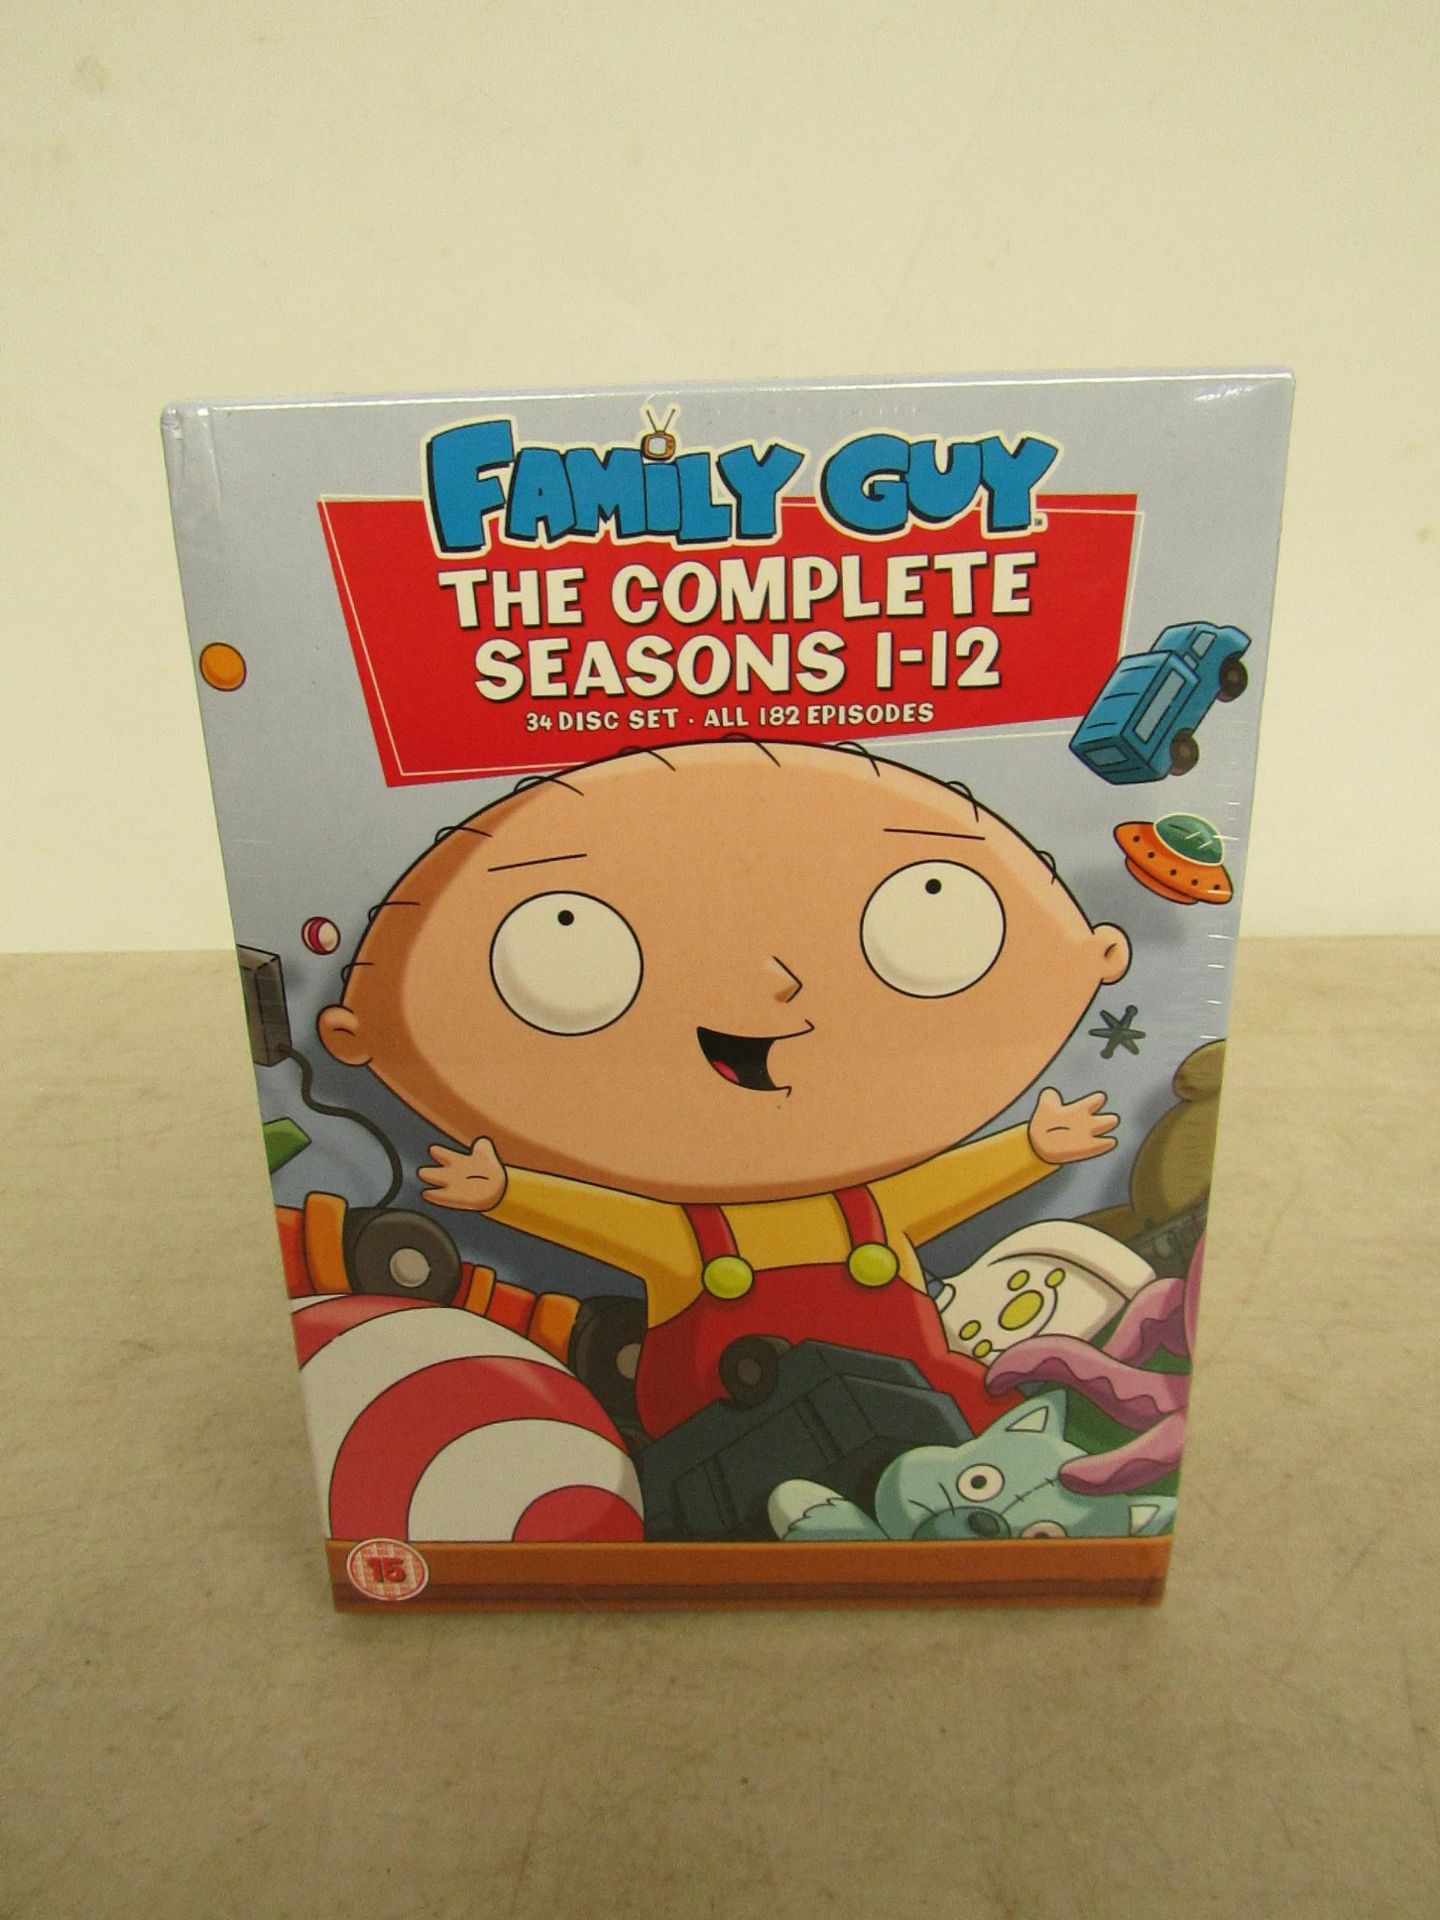 Family Guy complete seasons 1-12, new in packaging.